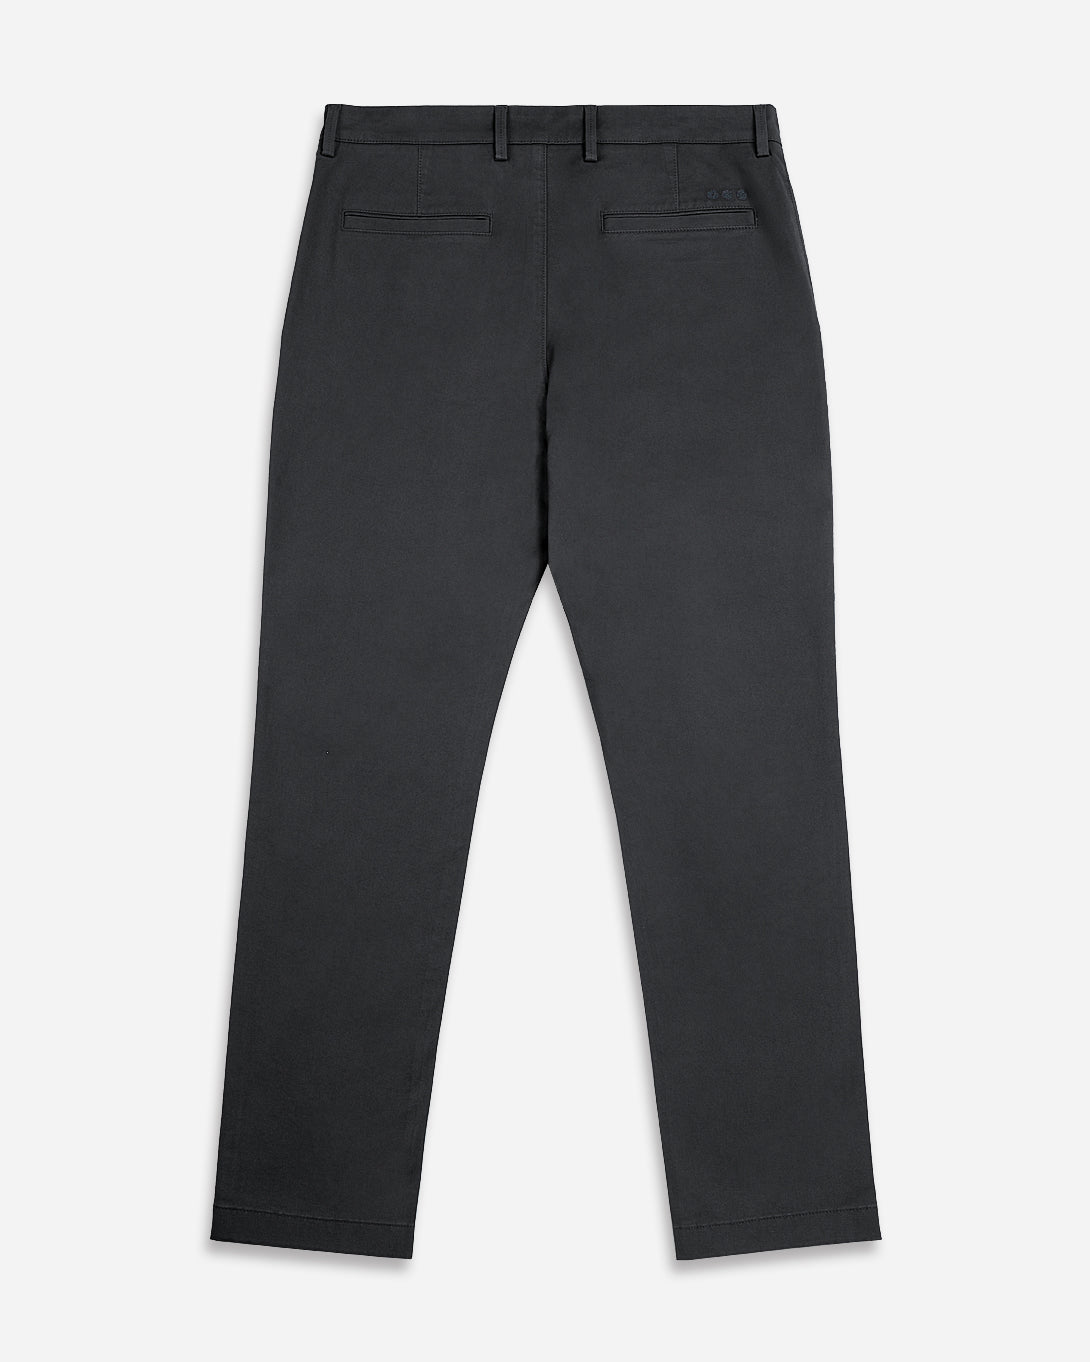 CHARCOAL Rider Stretch Chino Mens Tapered Lightweight Pants